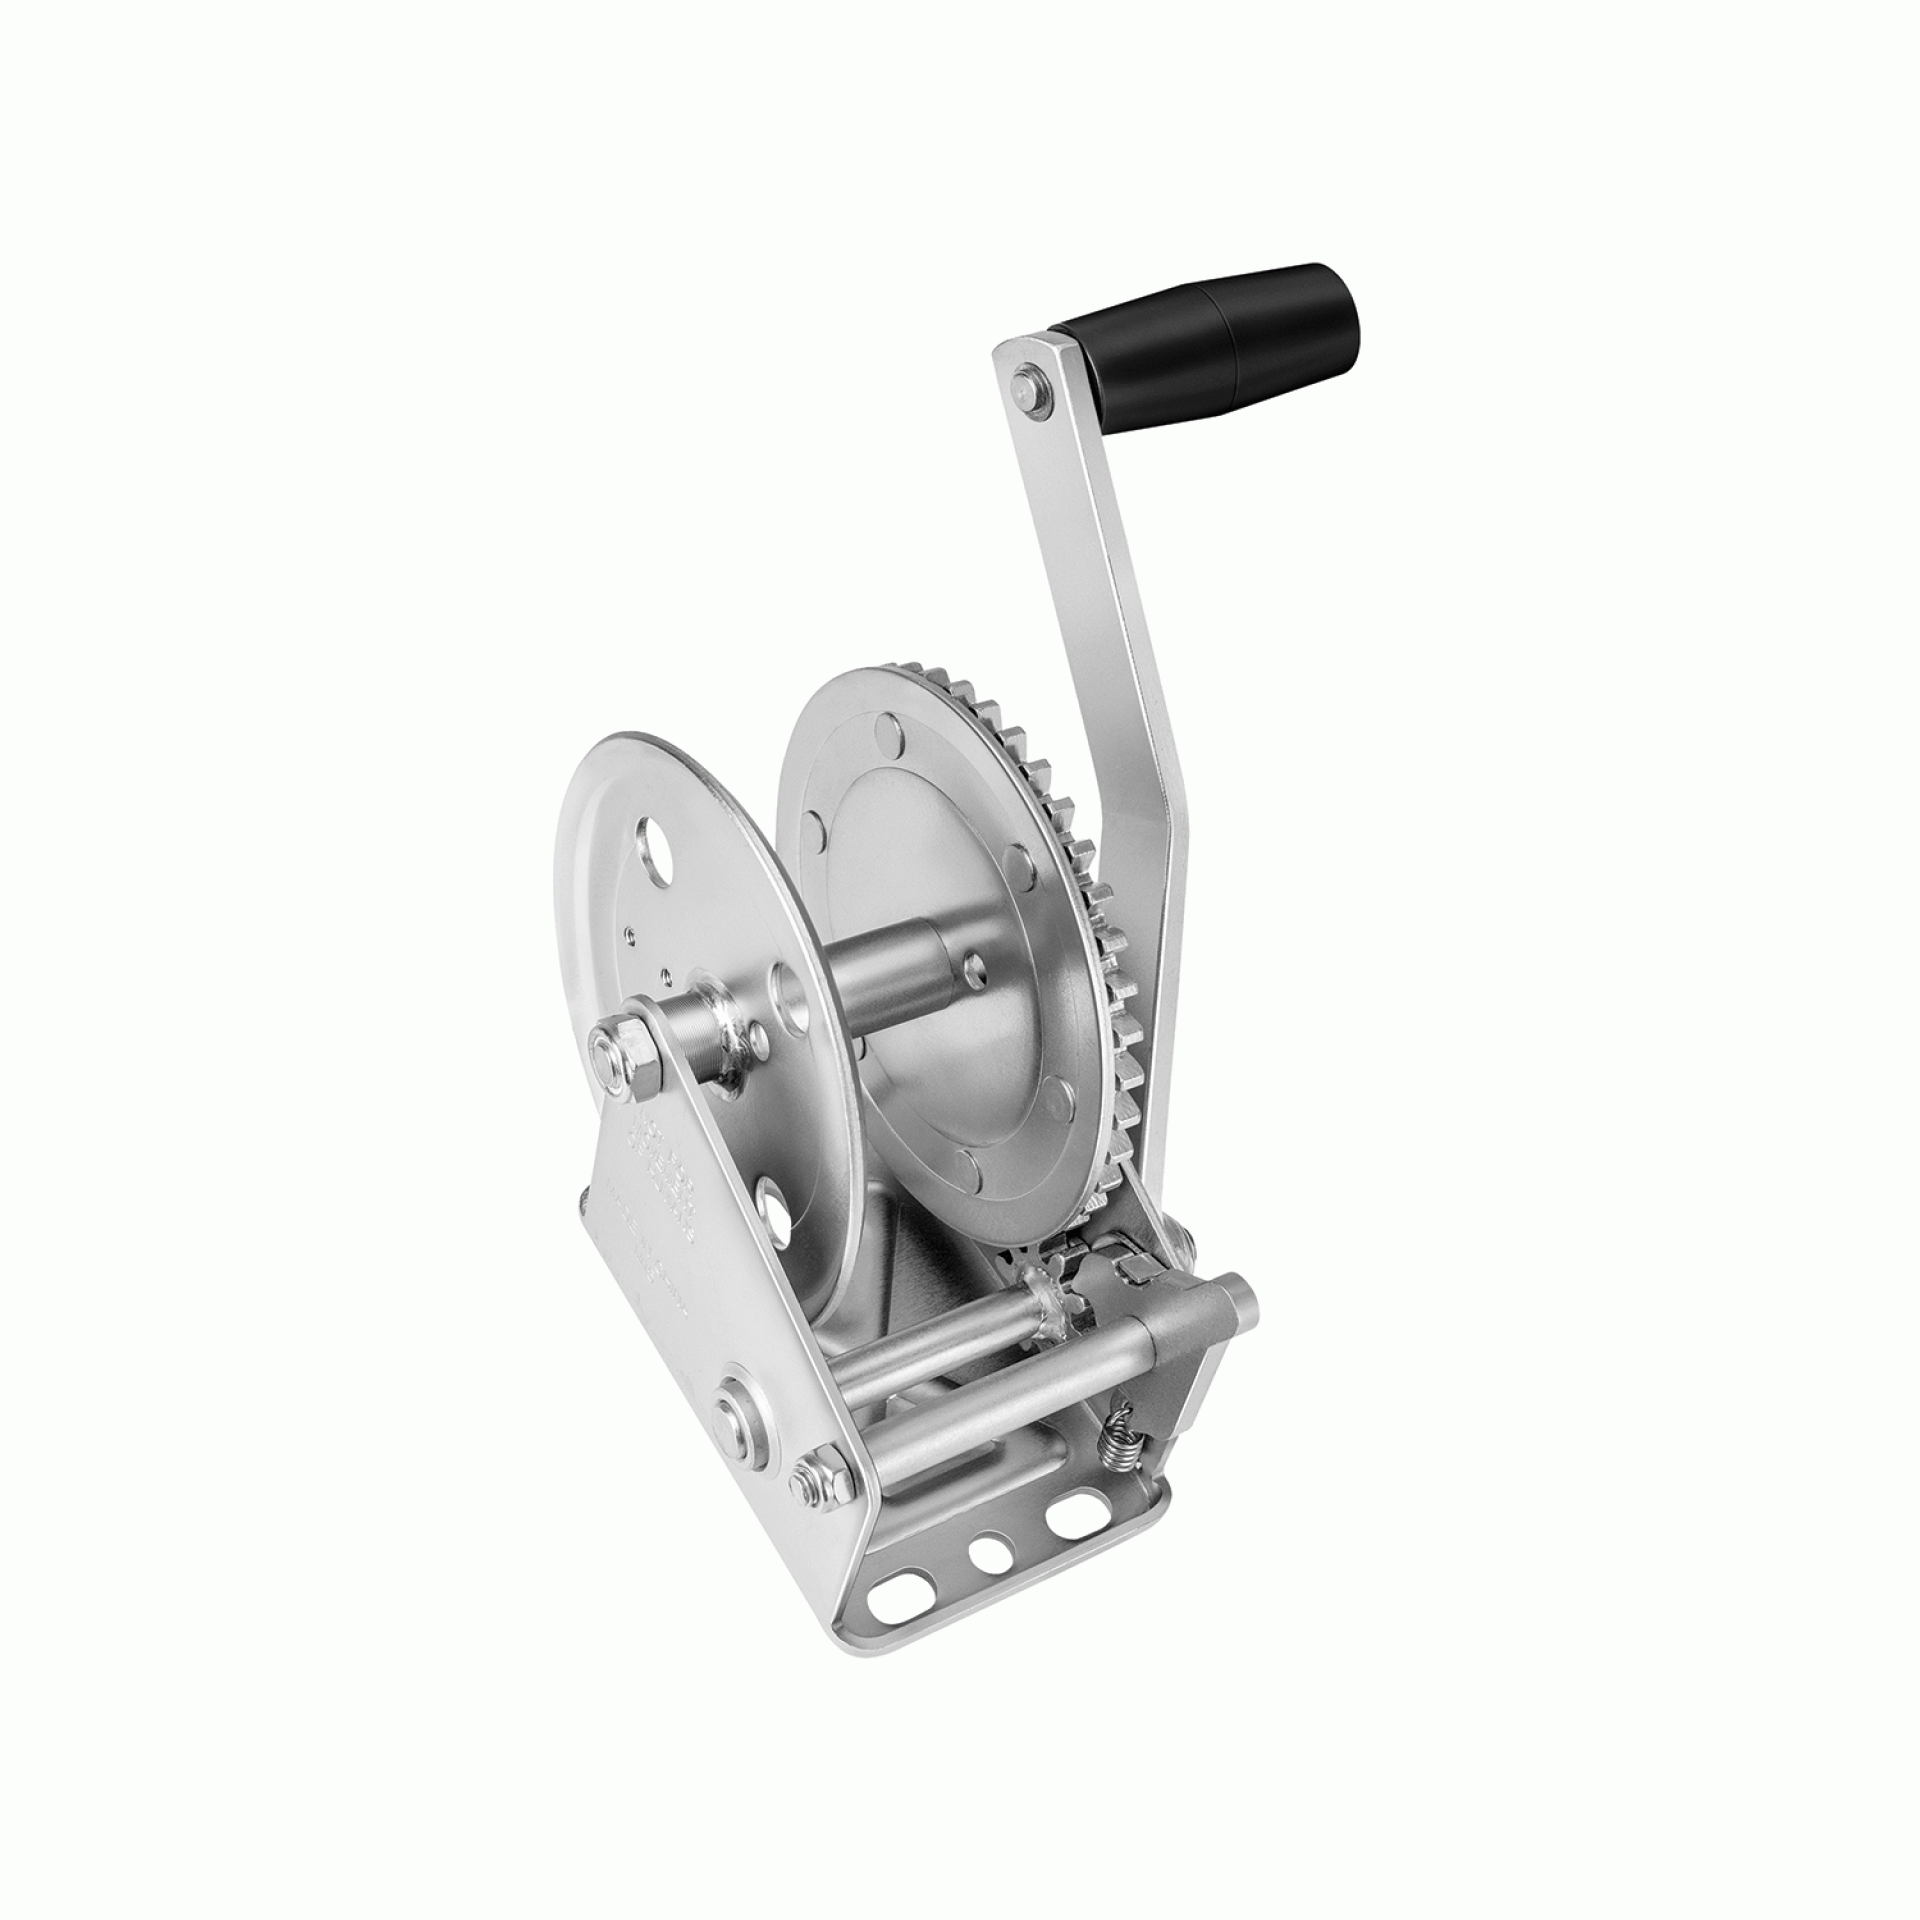 FULTON PERFORMANCE PRODUCTS | 142103 | Trailer Winch 1300 lb